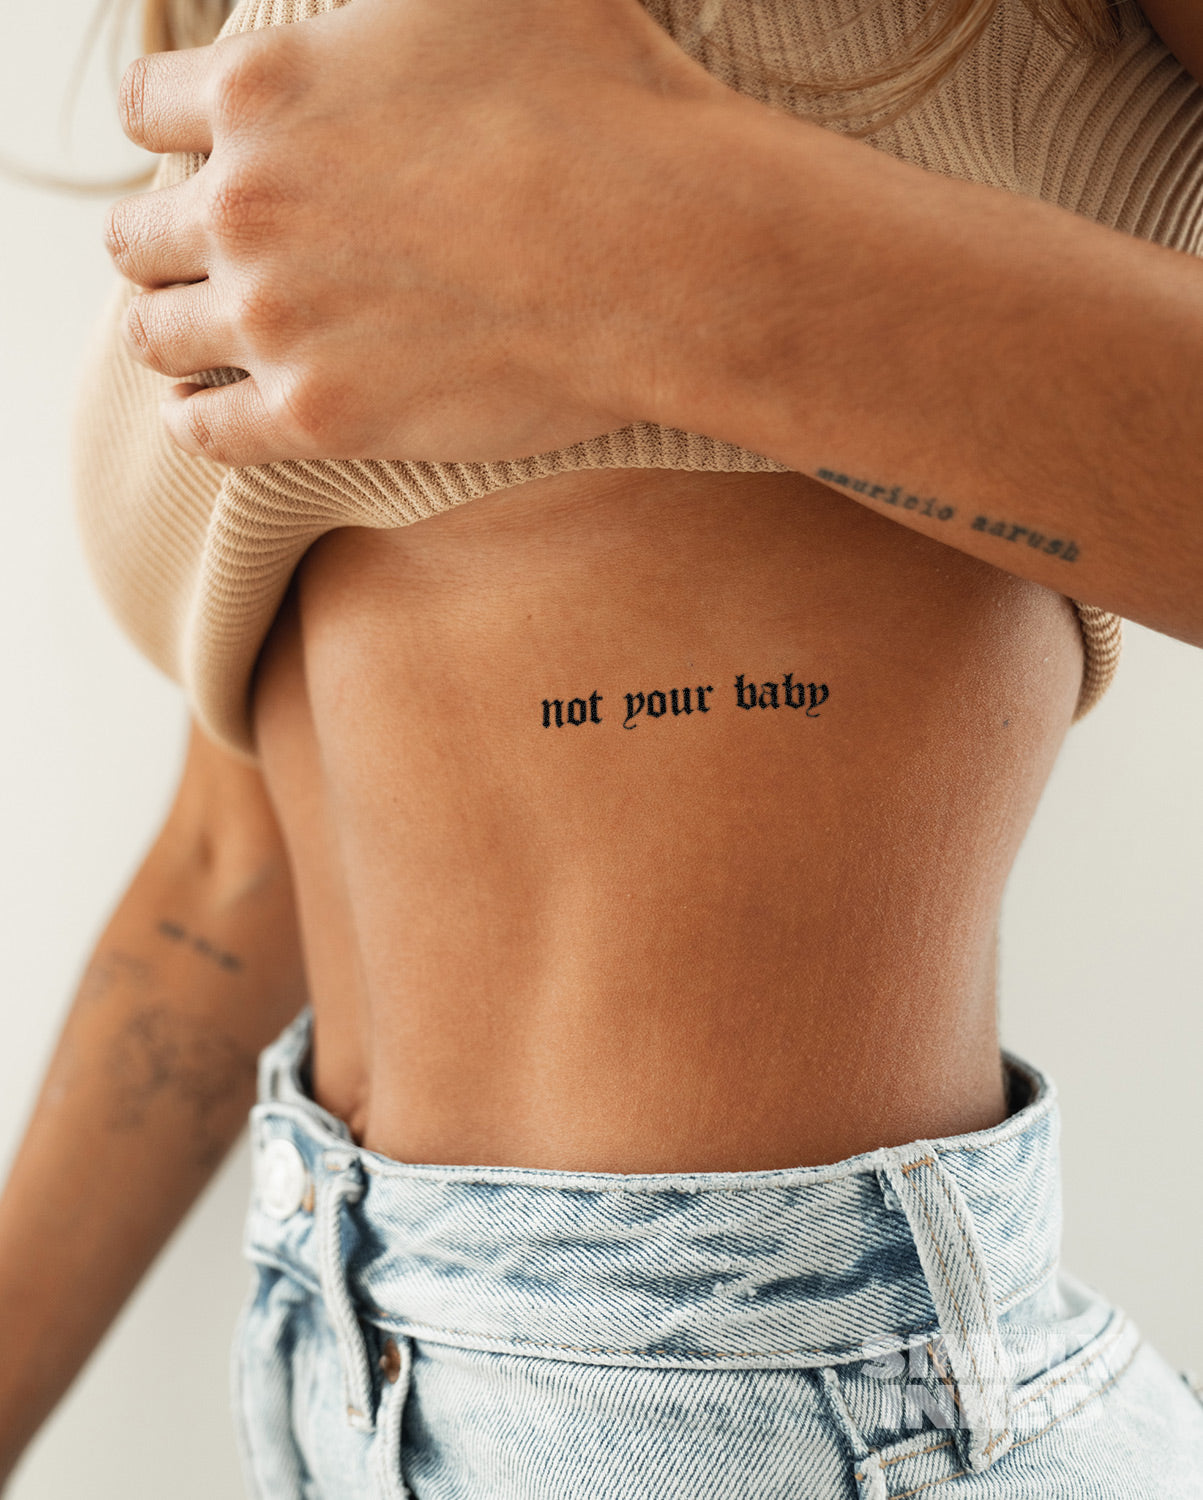 NEW Not your baby Tattoo